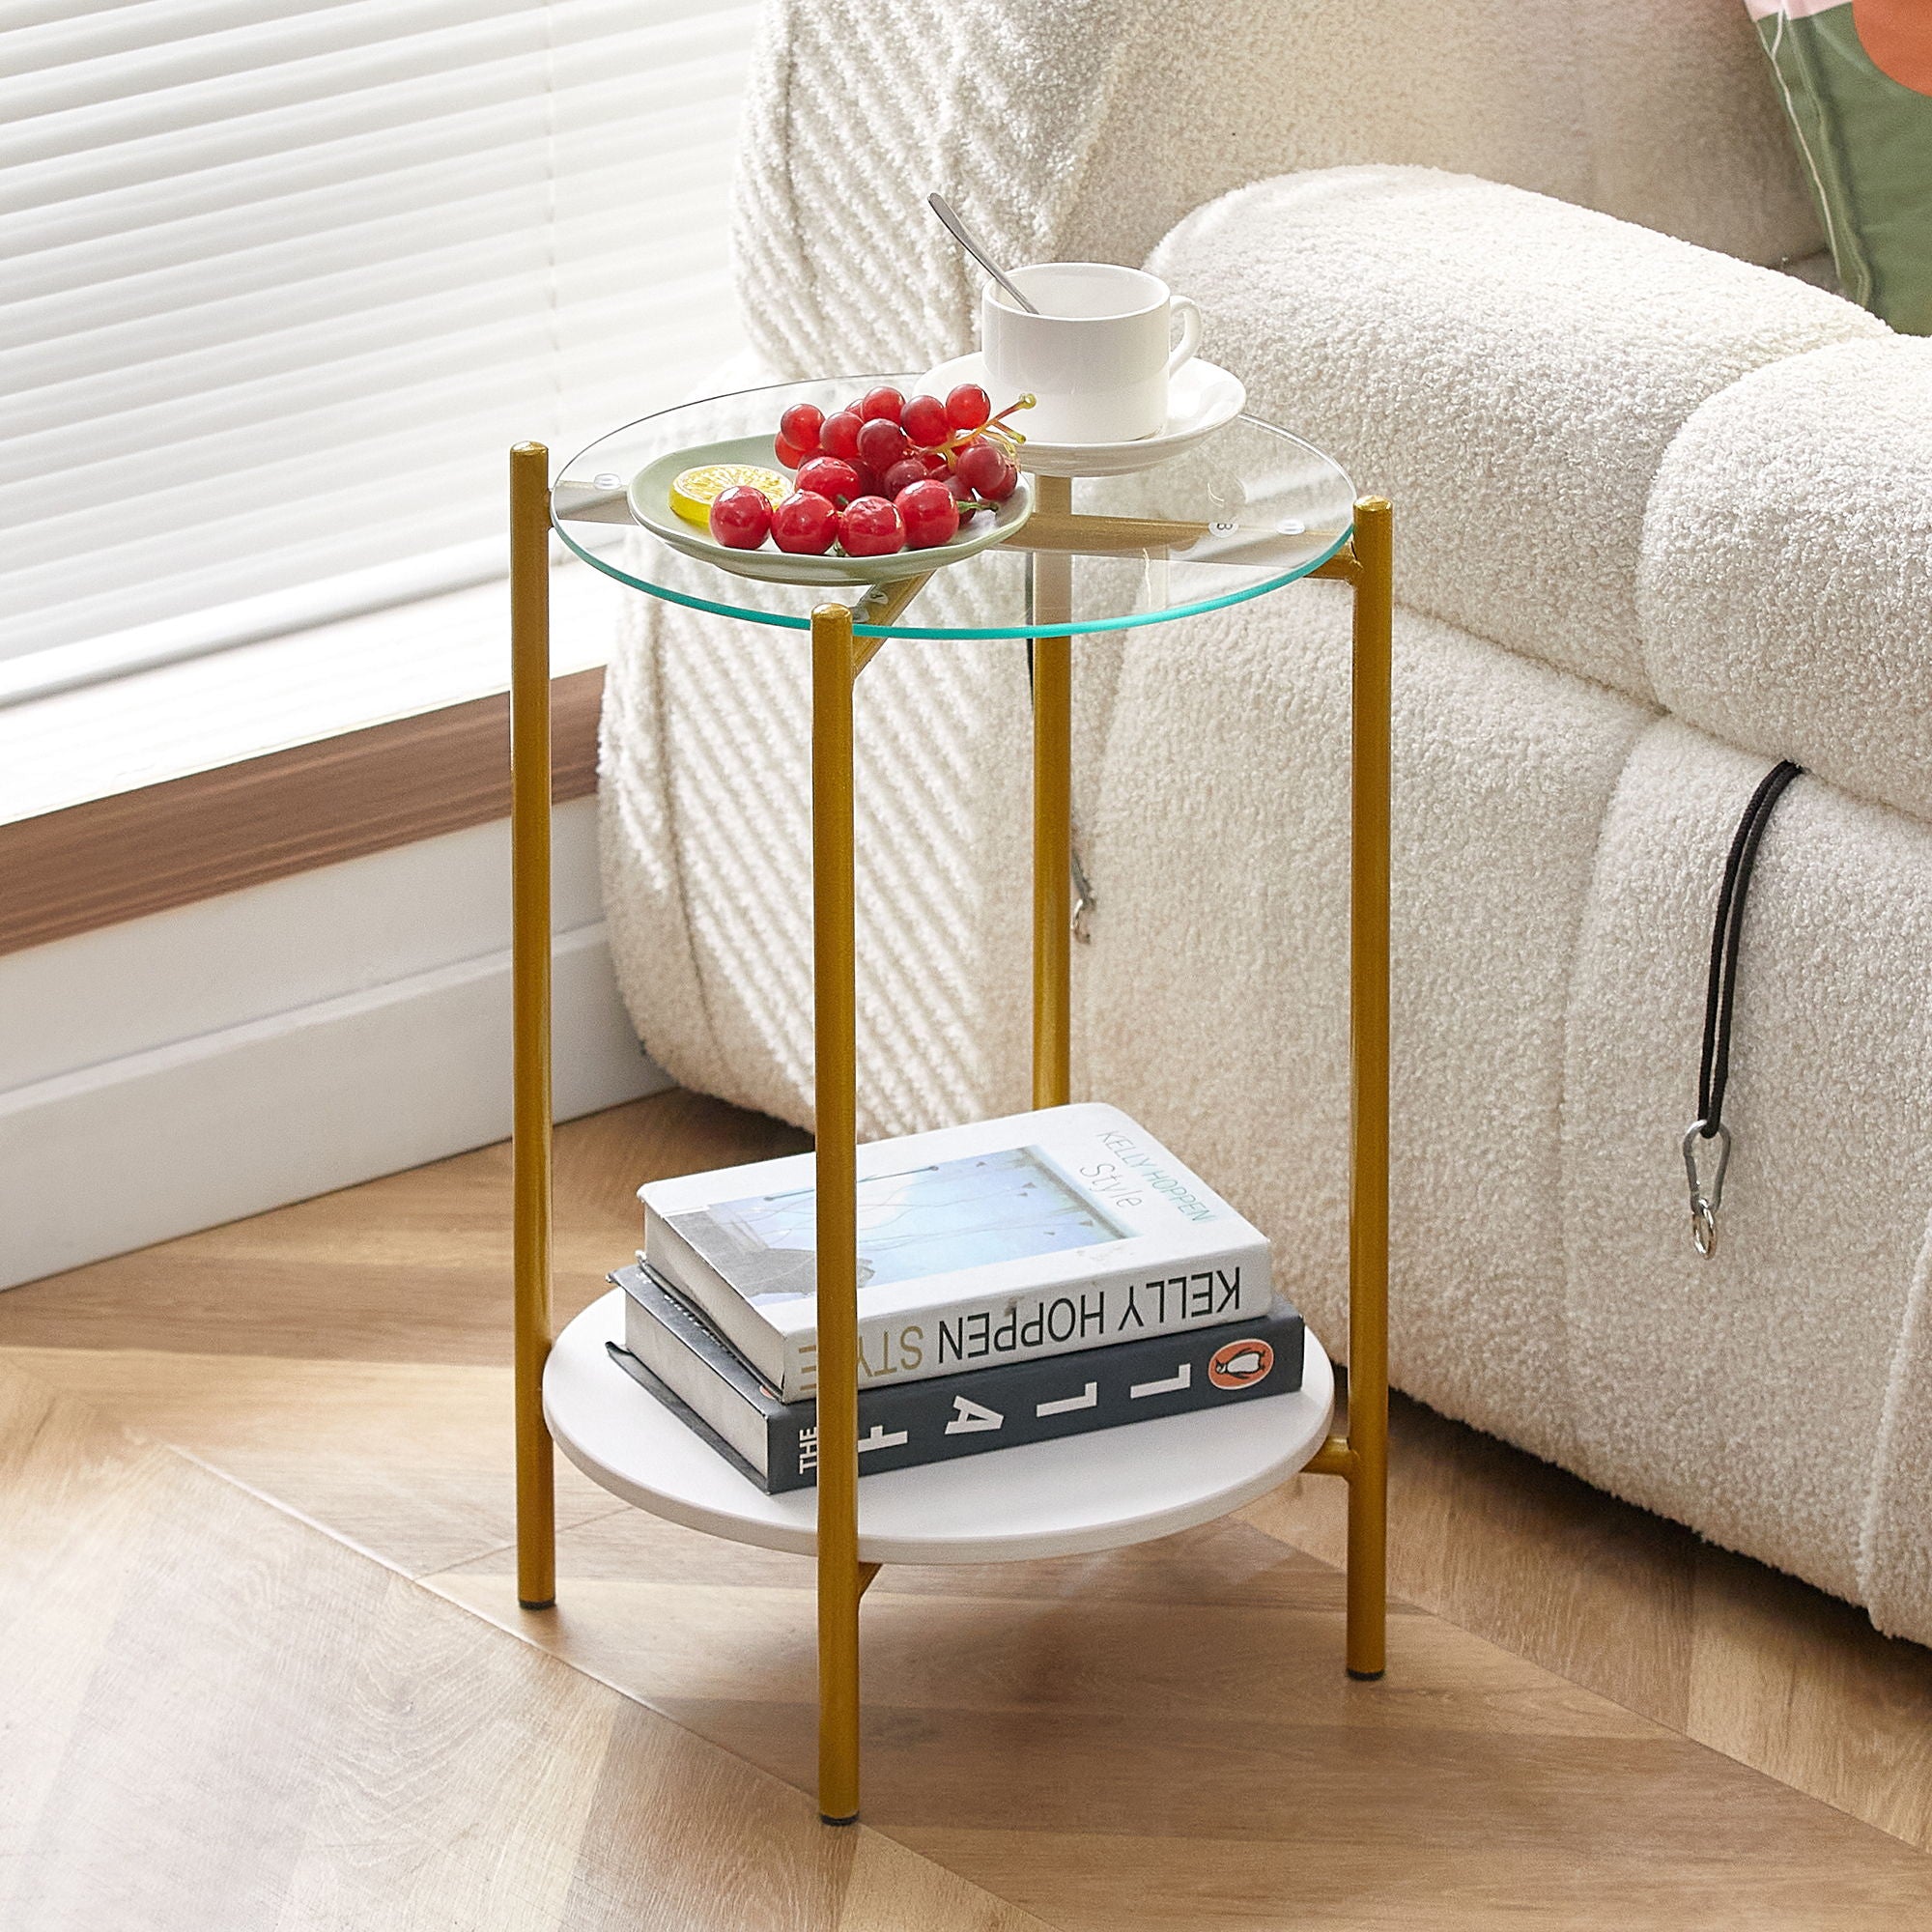 2 - Layer End Table With Tempered Glass And Marble Tabletop, Round Coffee Table With Golden Metal Frame For Bedroom Living Room Office